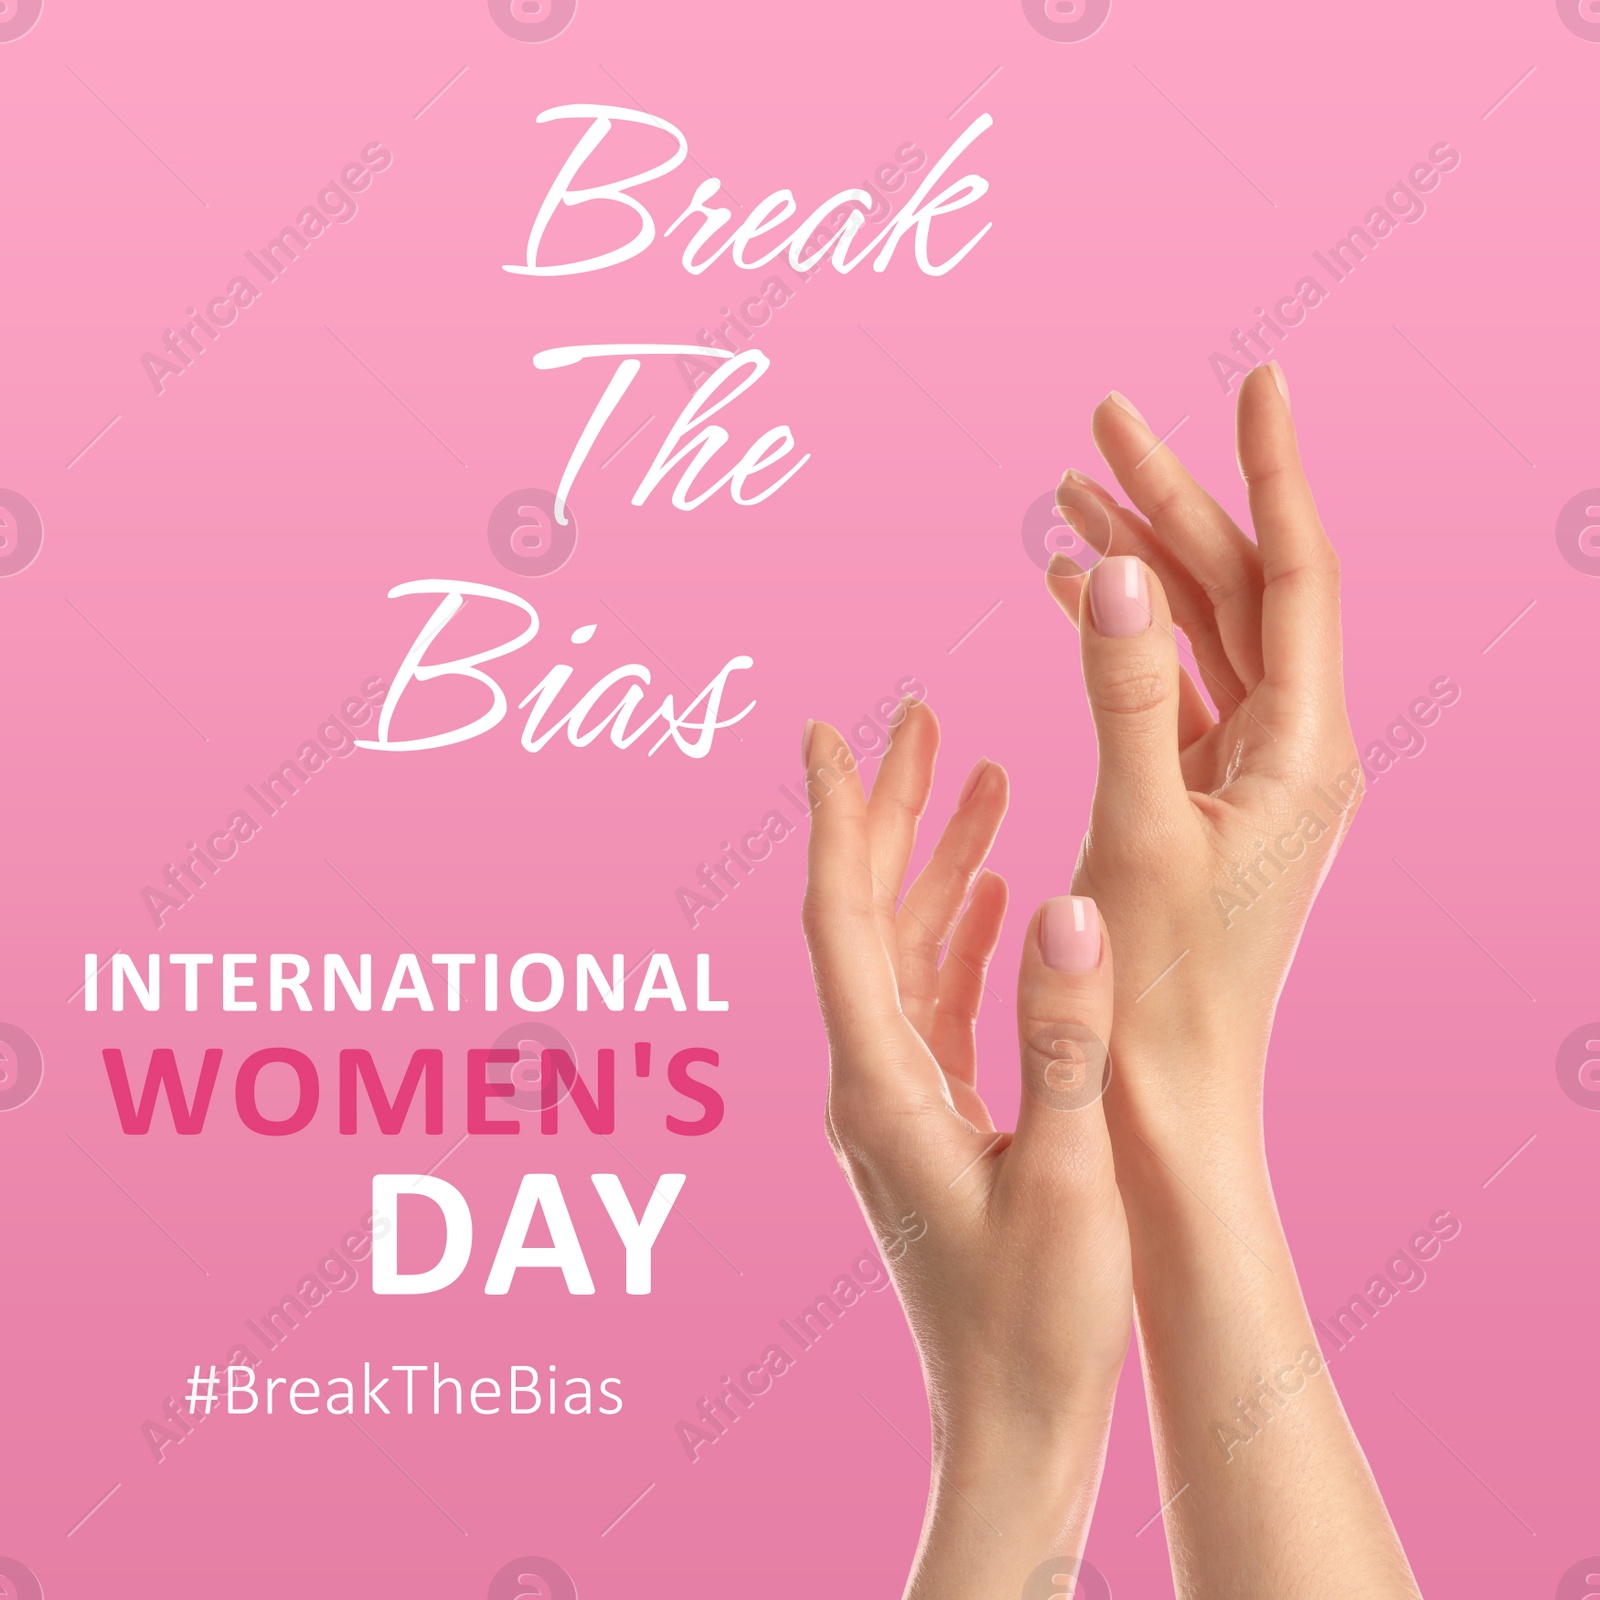 Image of International Women's Day, Break The Bias. Closeup view of woman on pink background